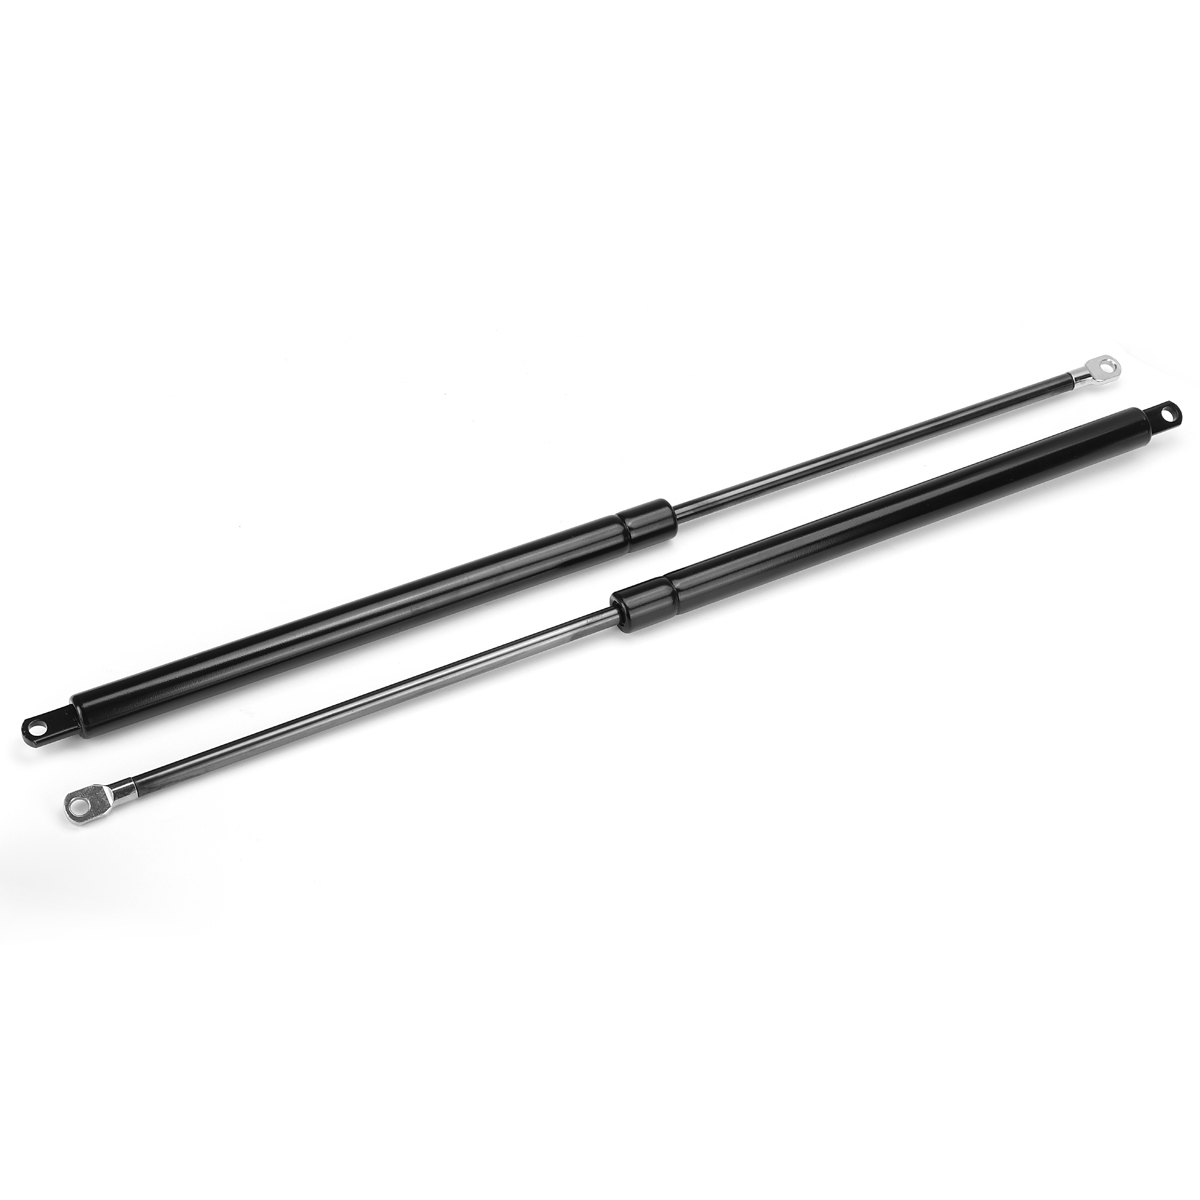 2Pcs-310-810mm-Extended-100-350-Compressed-Universal-800N-Force-Gas-Springs-Struts-Lifters-Supports--1777718-9